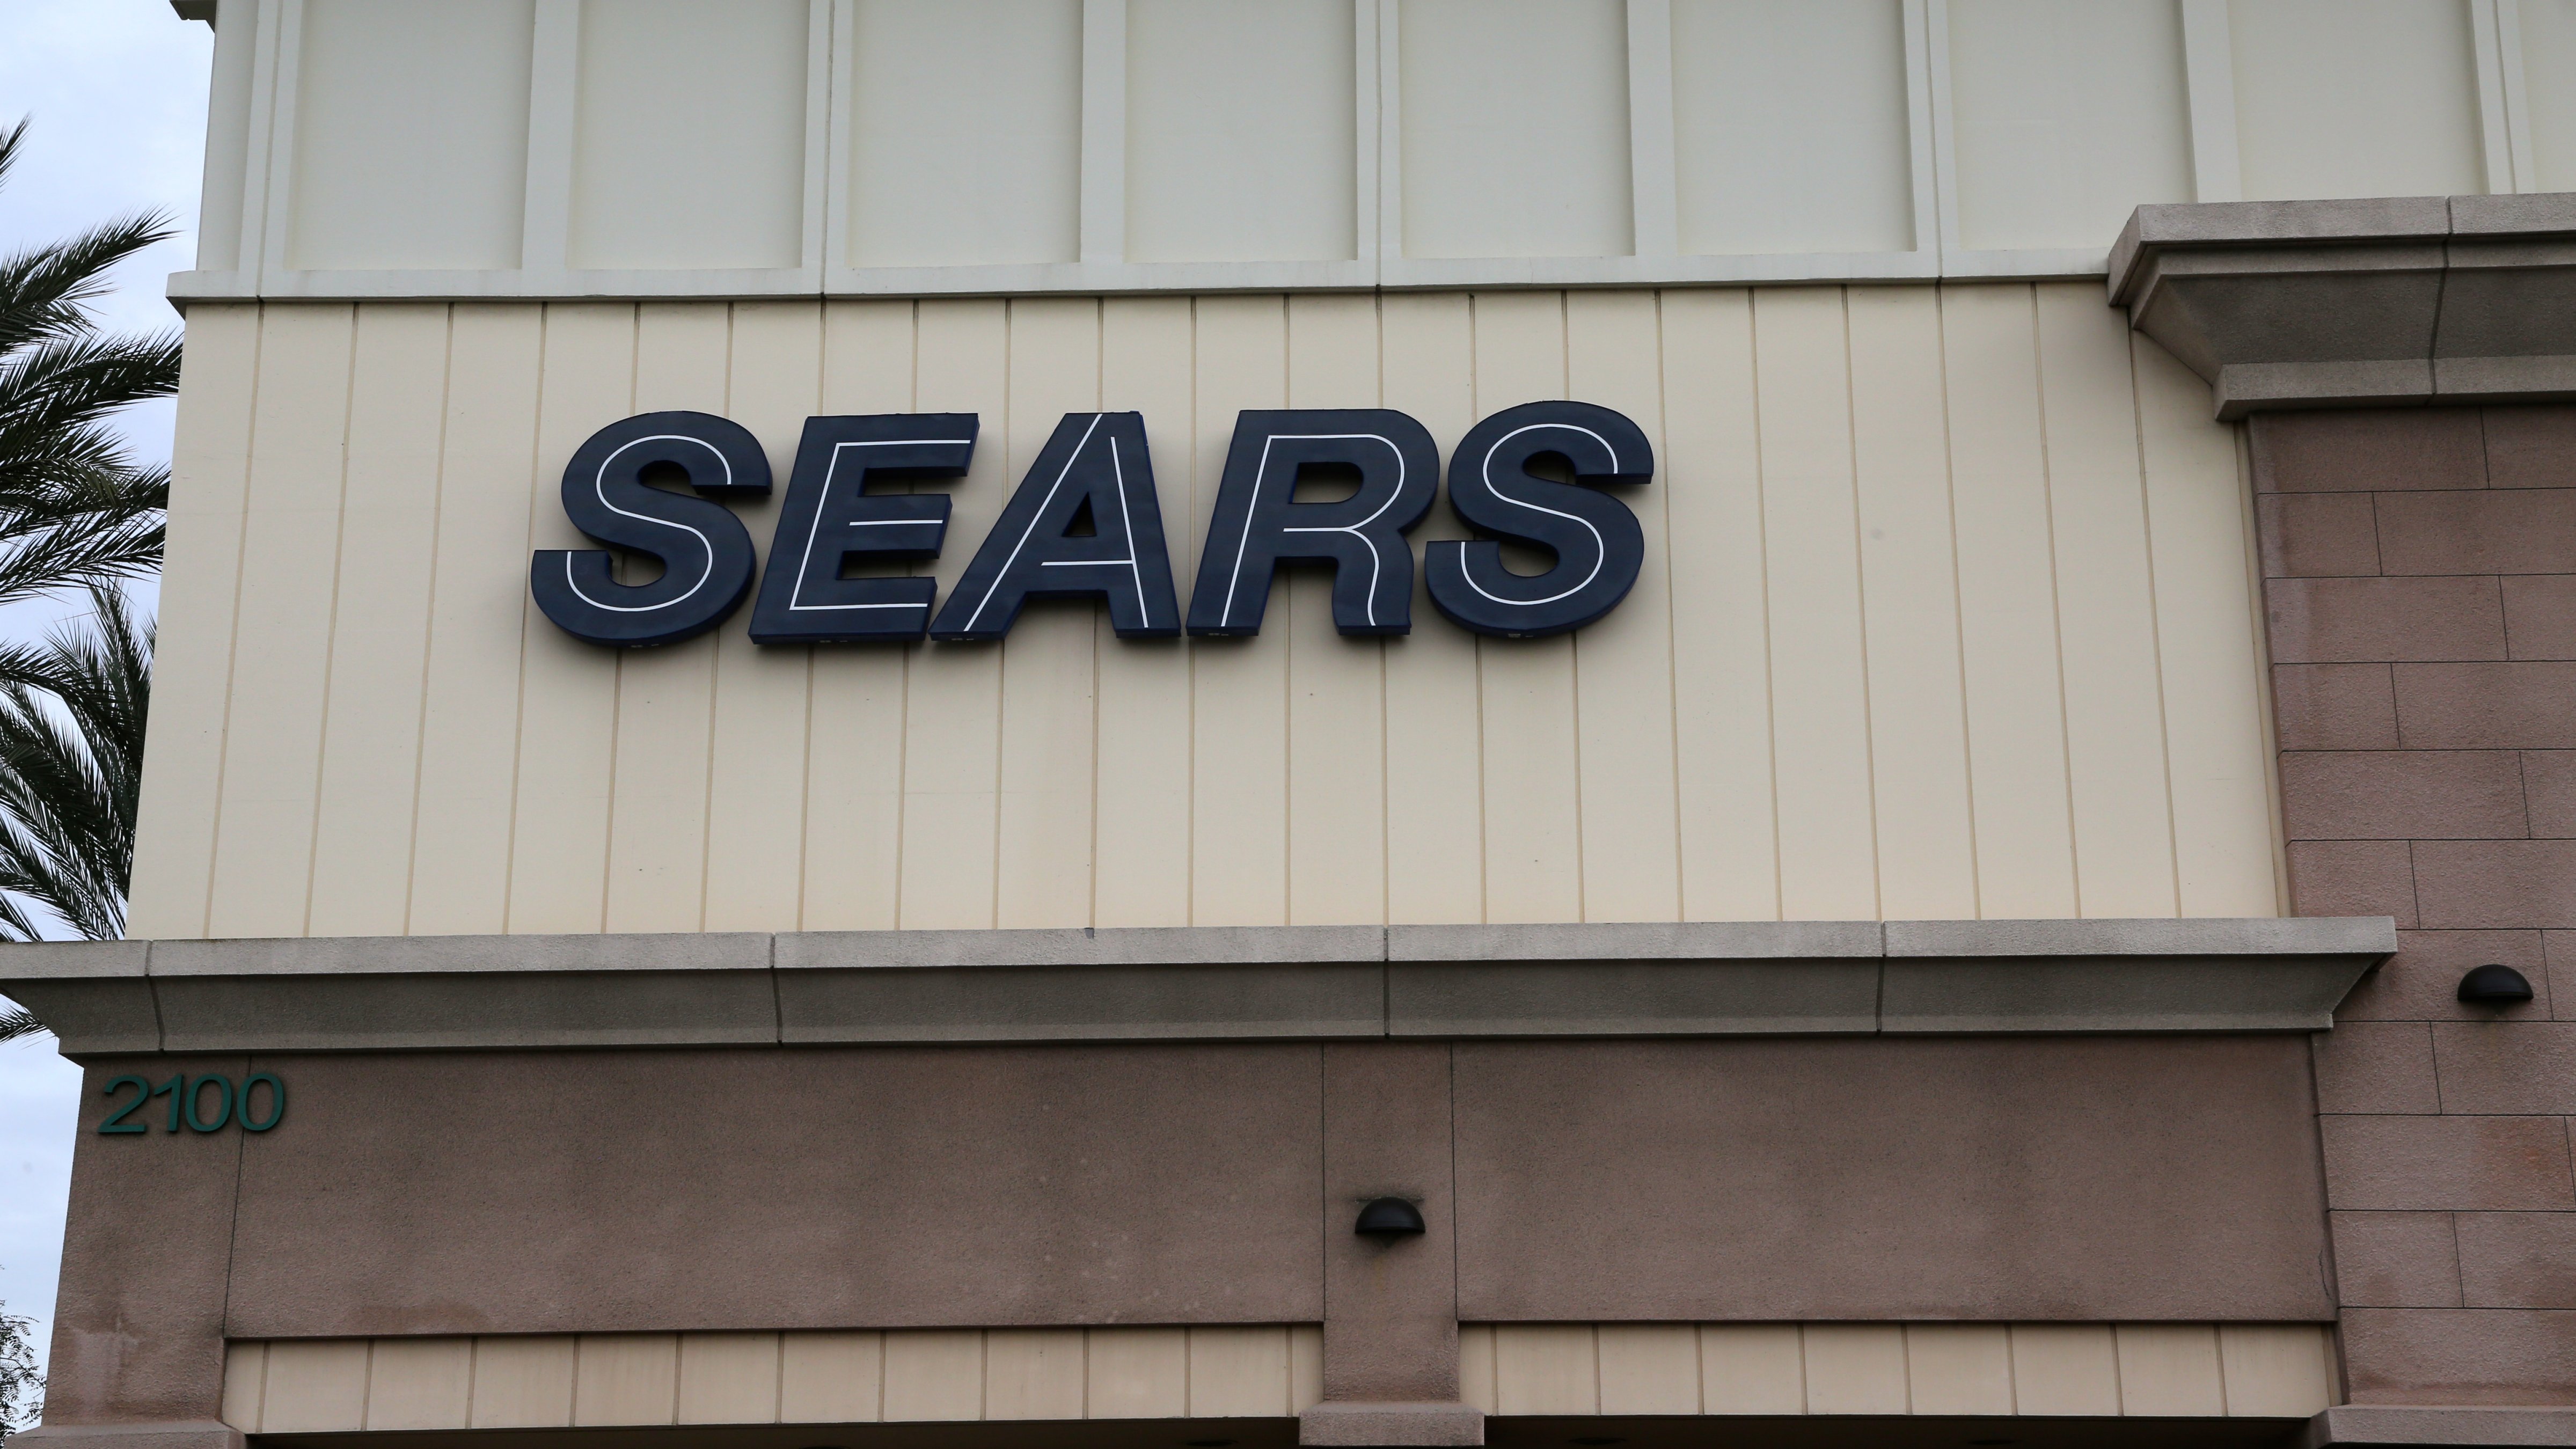 A Sears store is pictured in Long Beach, California